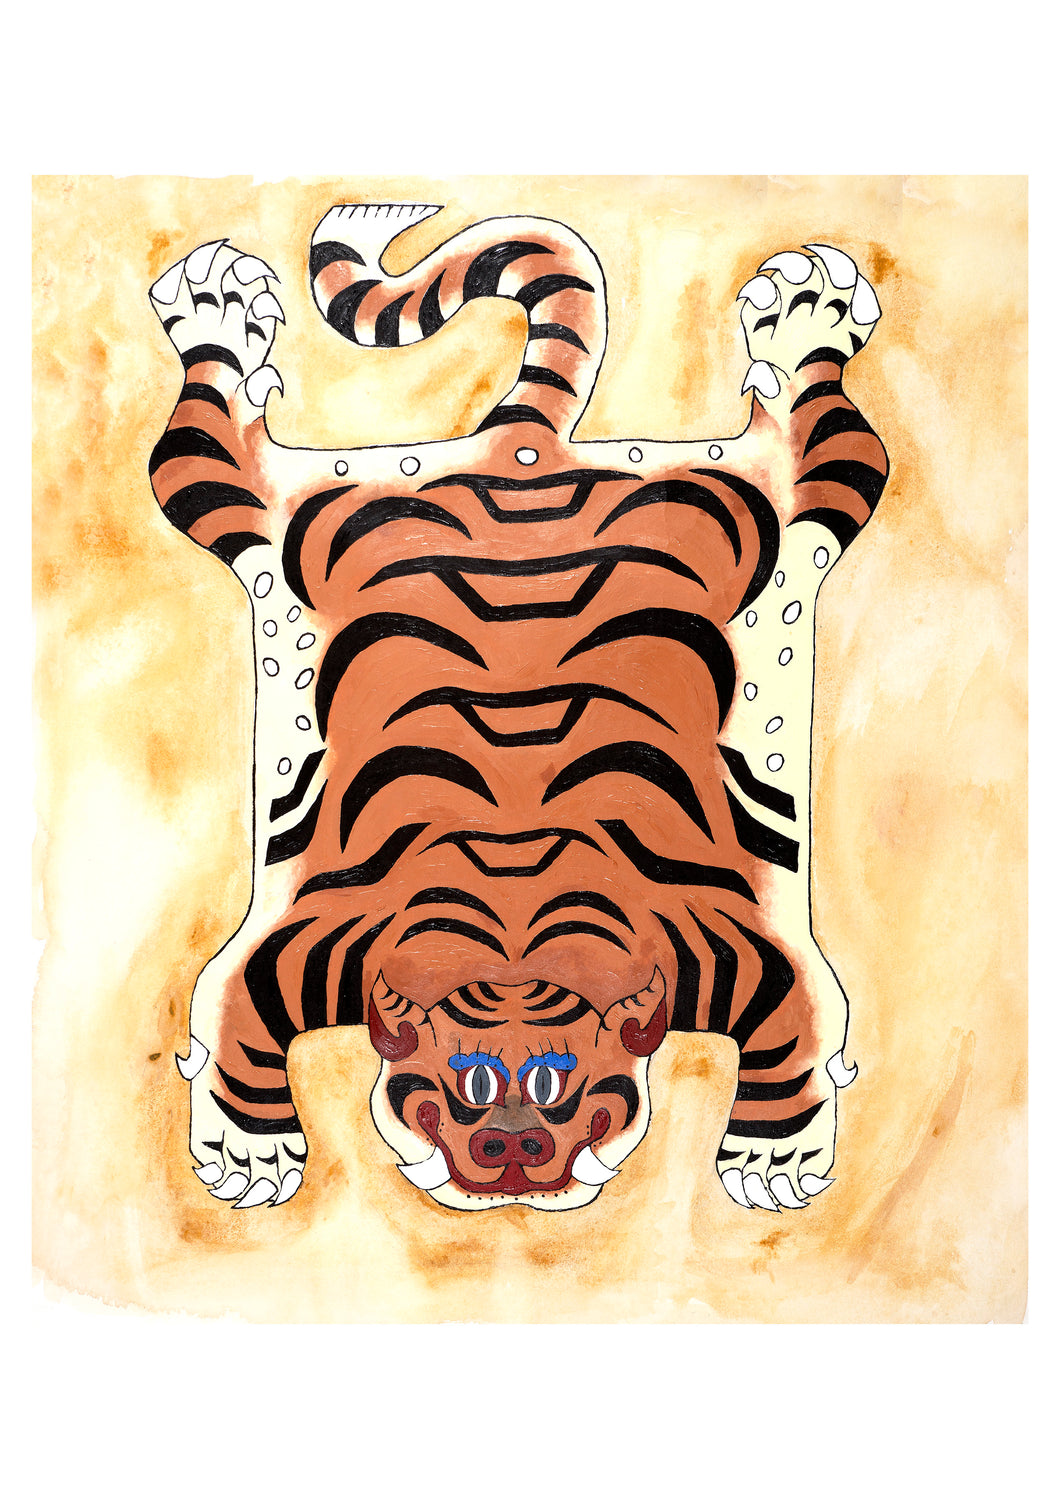 Tibetan Tiger Tea Stained - Signed Print